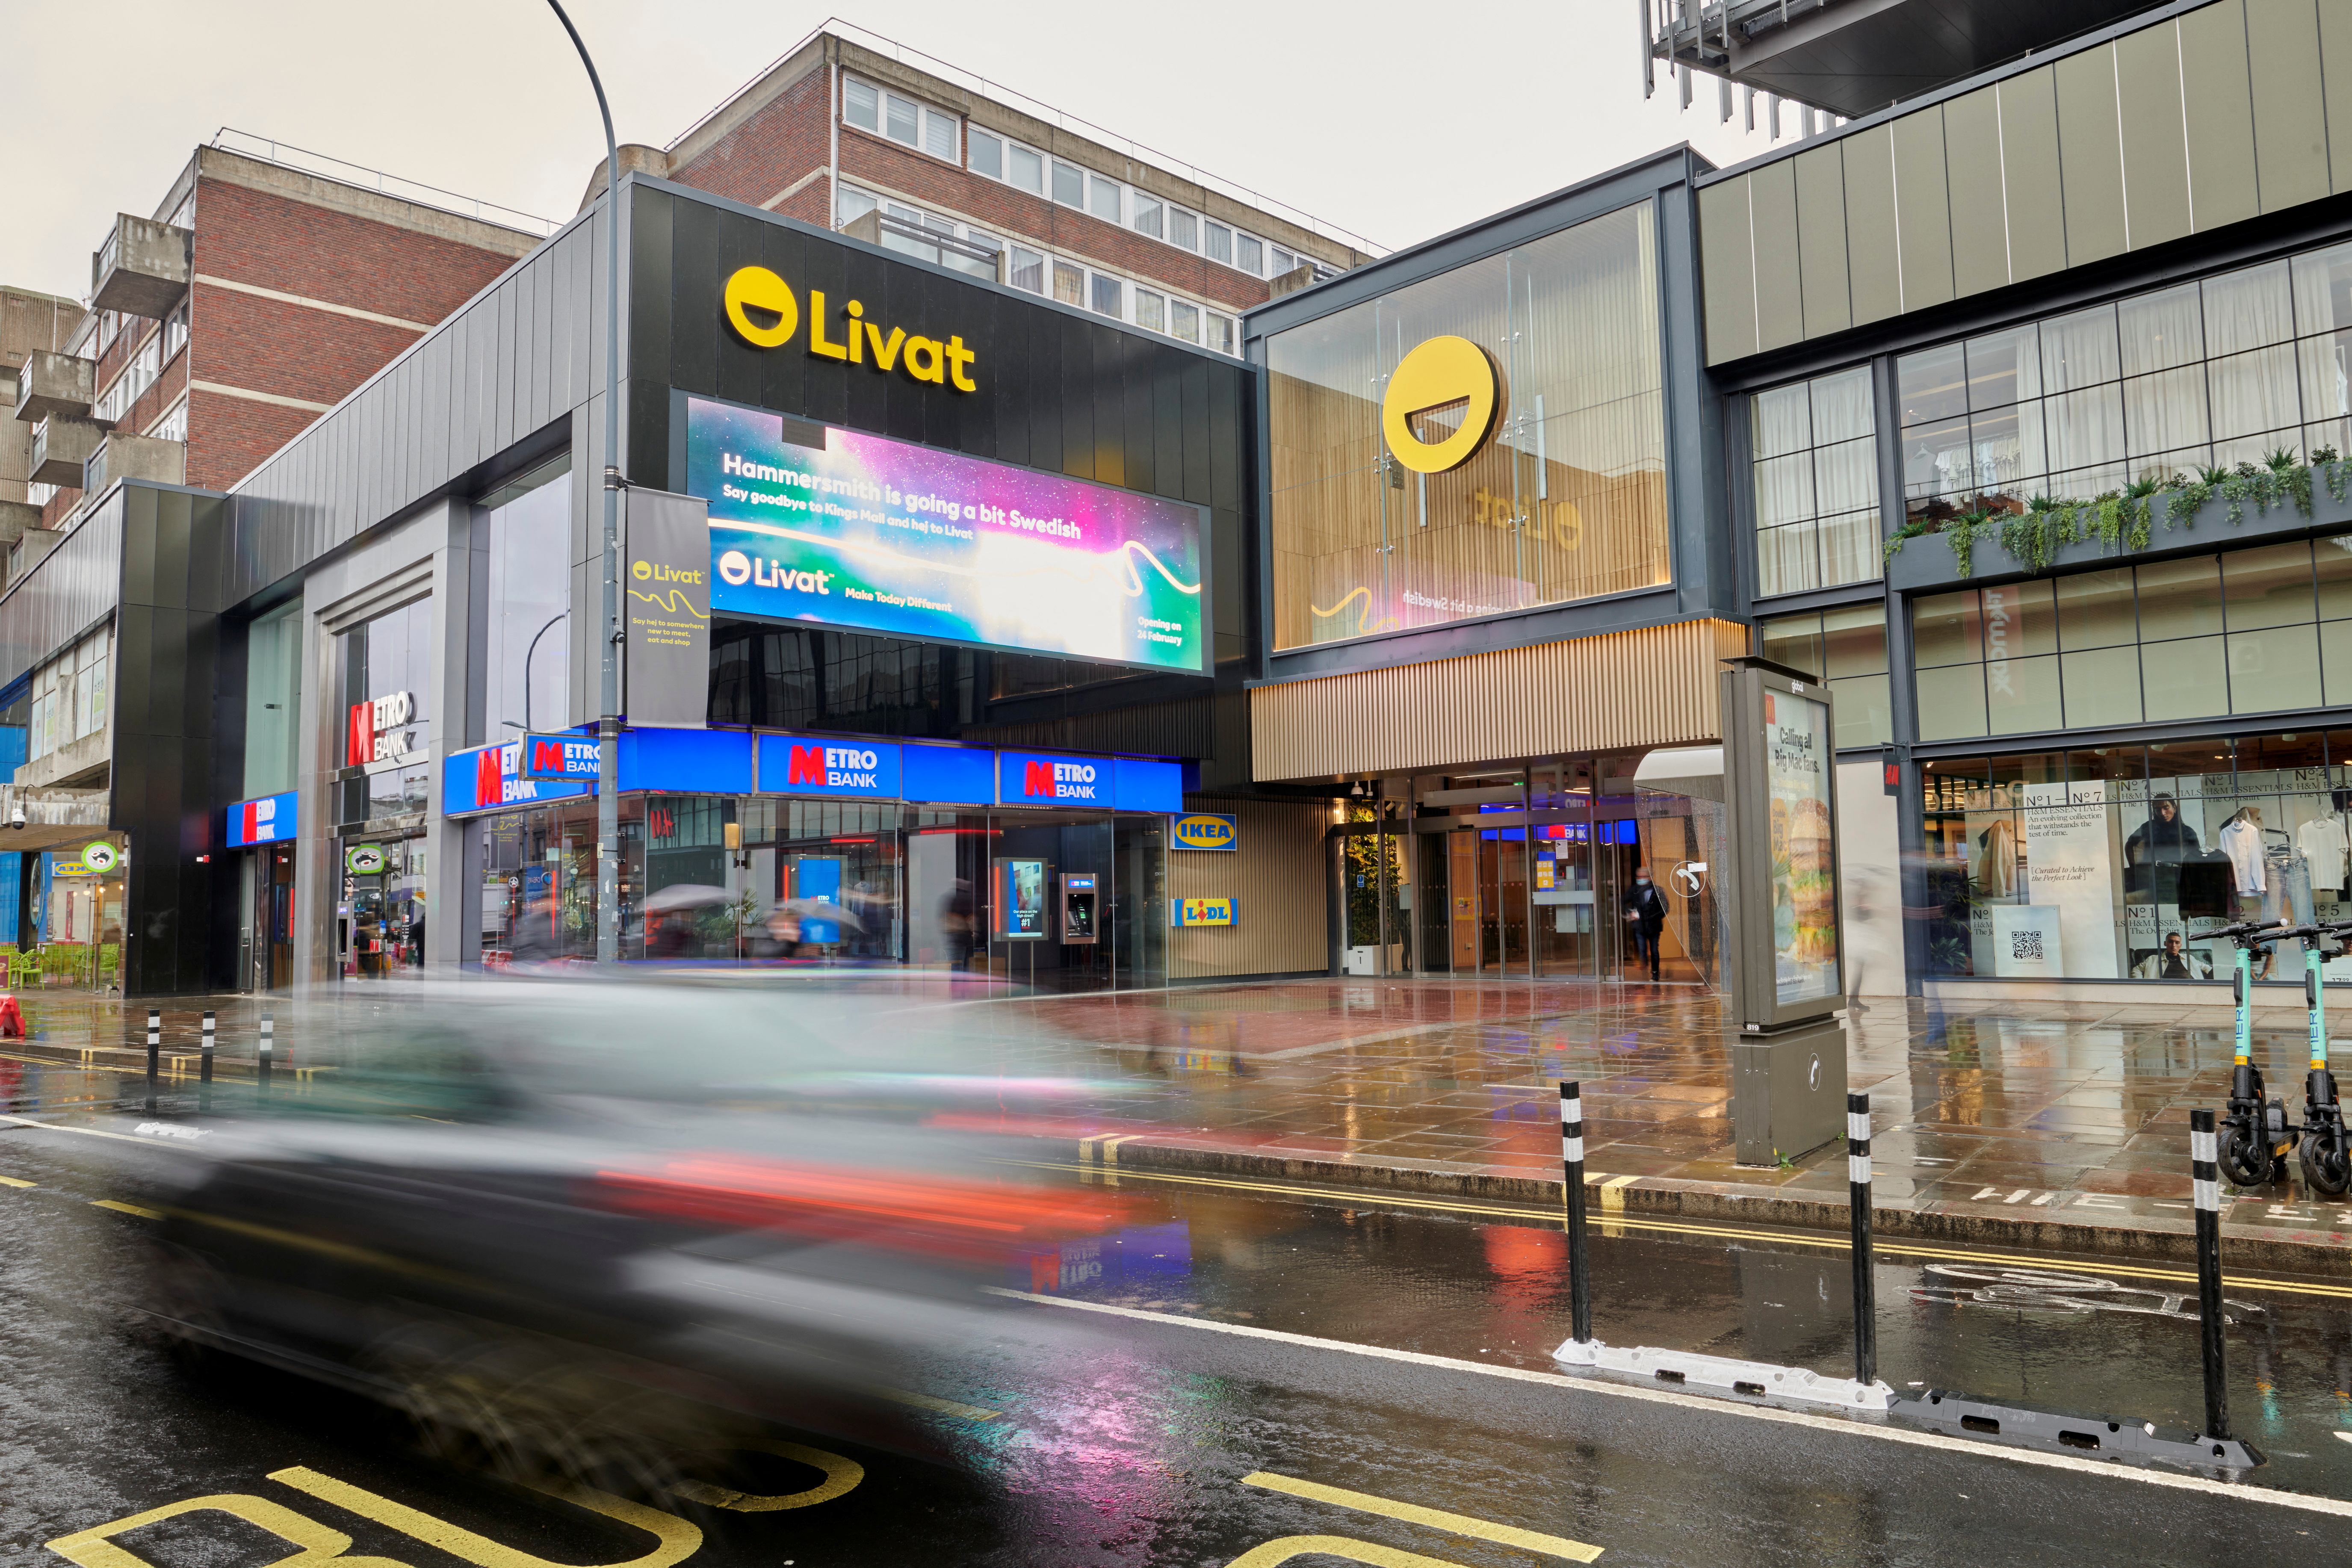 A general view of the IKEA-owned Livat shopping centre, in Hammersmith, London